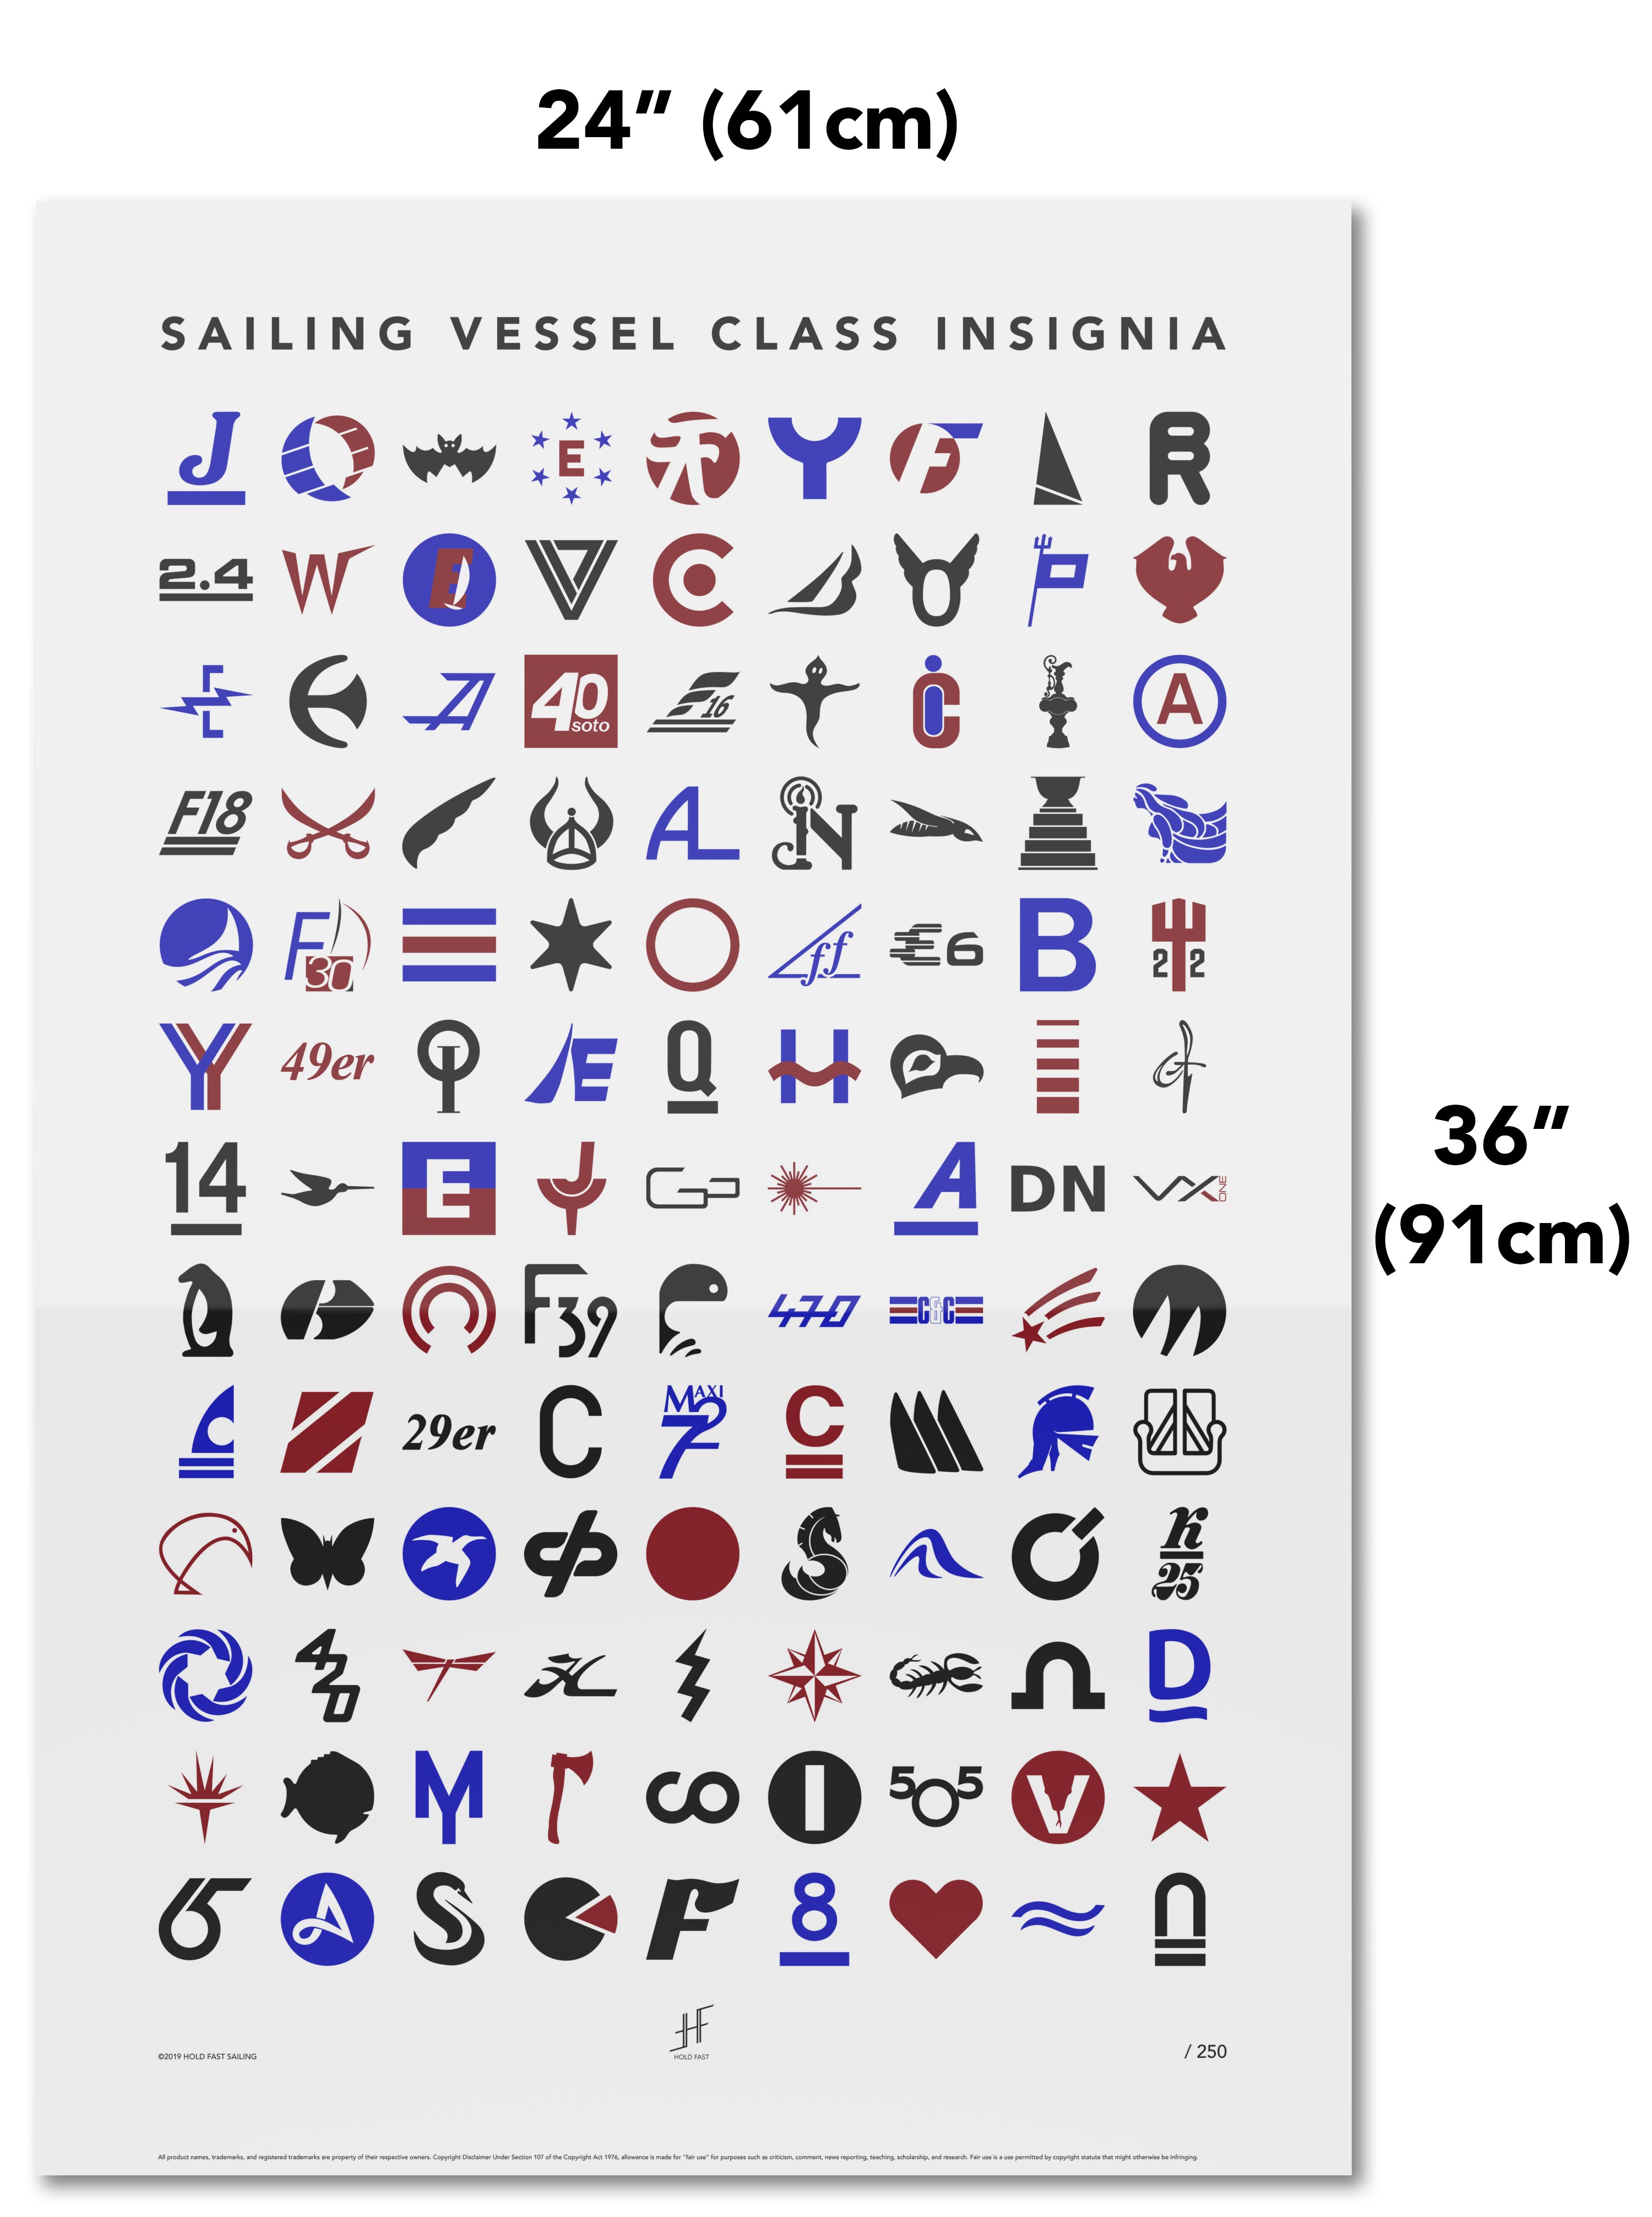 Sailing Vessel Class Insignia, Colour, Limited Edition